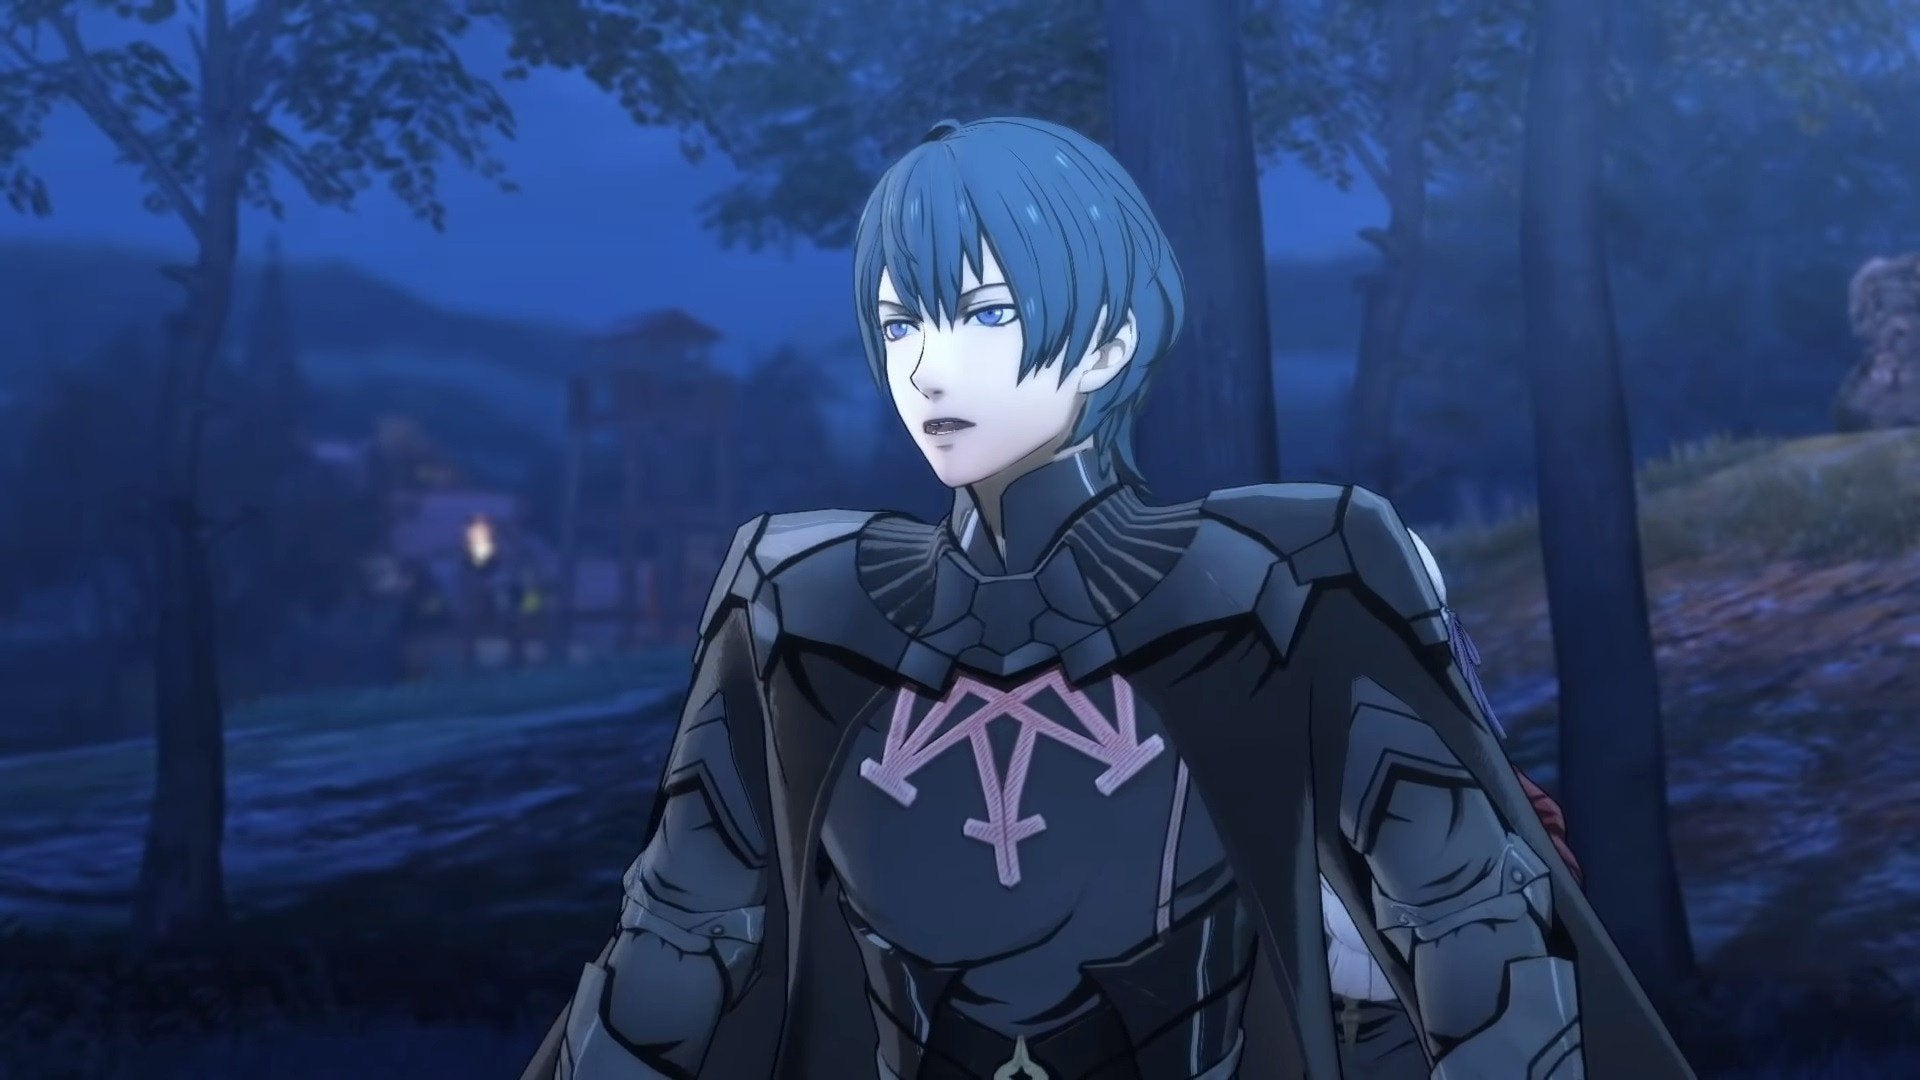 Controversial Voice Actor Chris Niosi Will Be Replaced In Fire Emblem: Three Houses